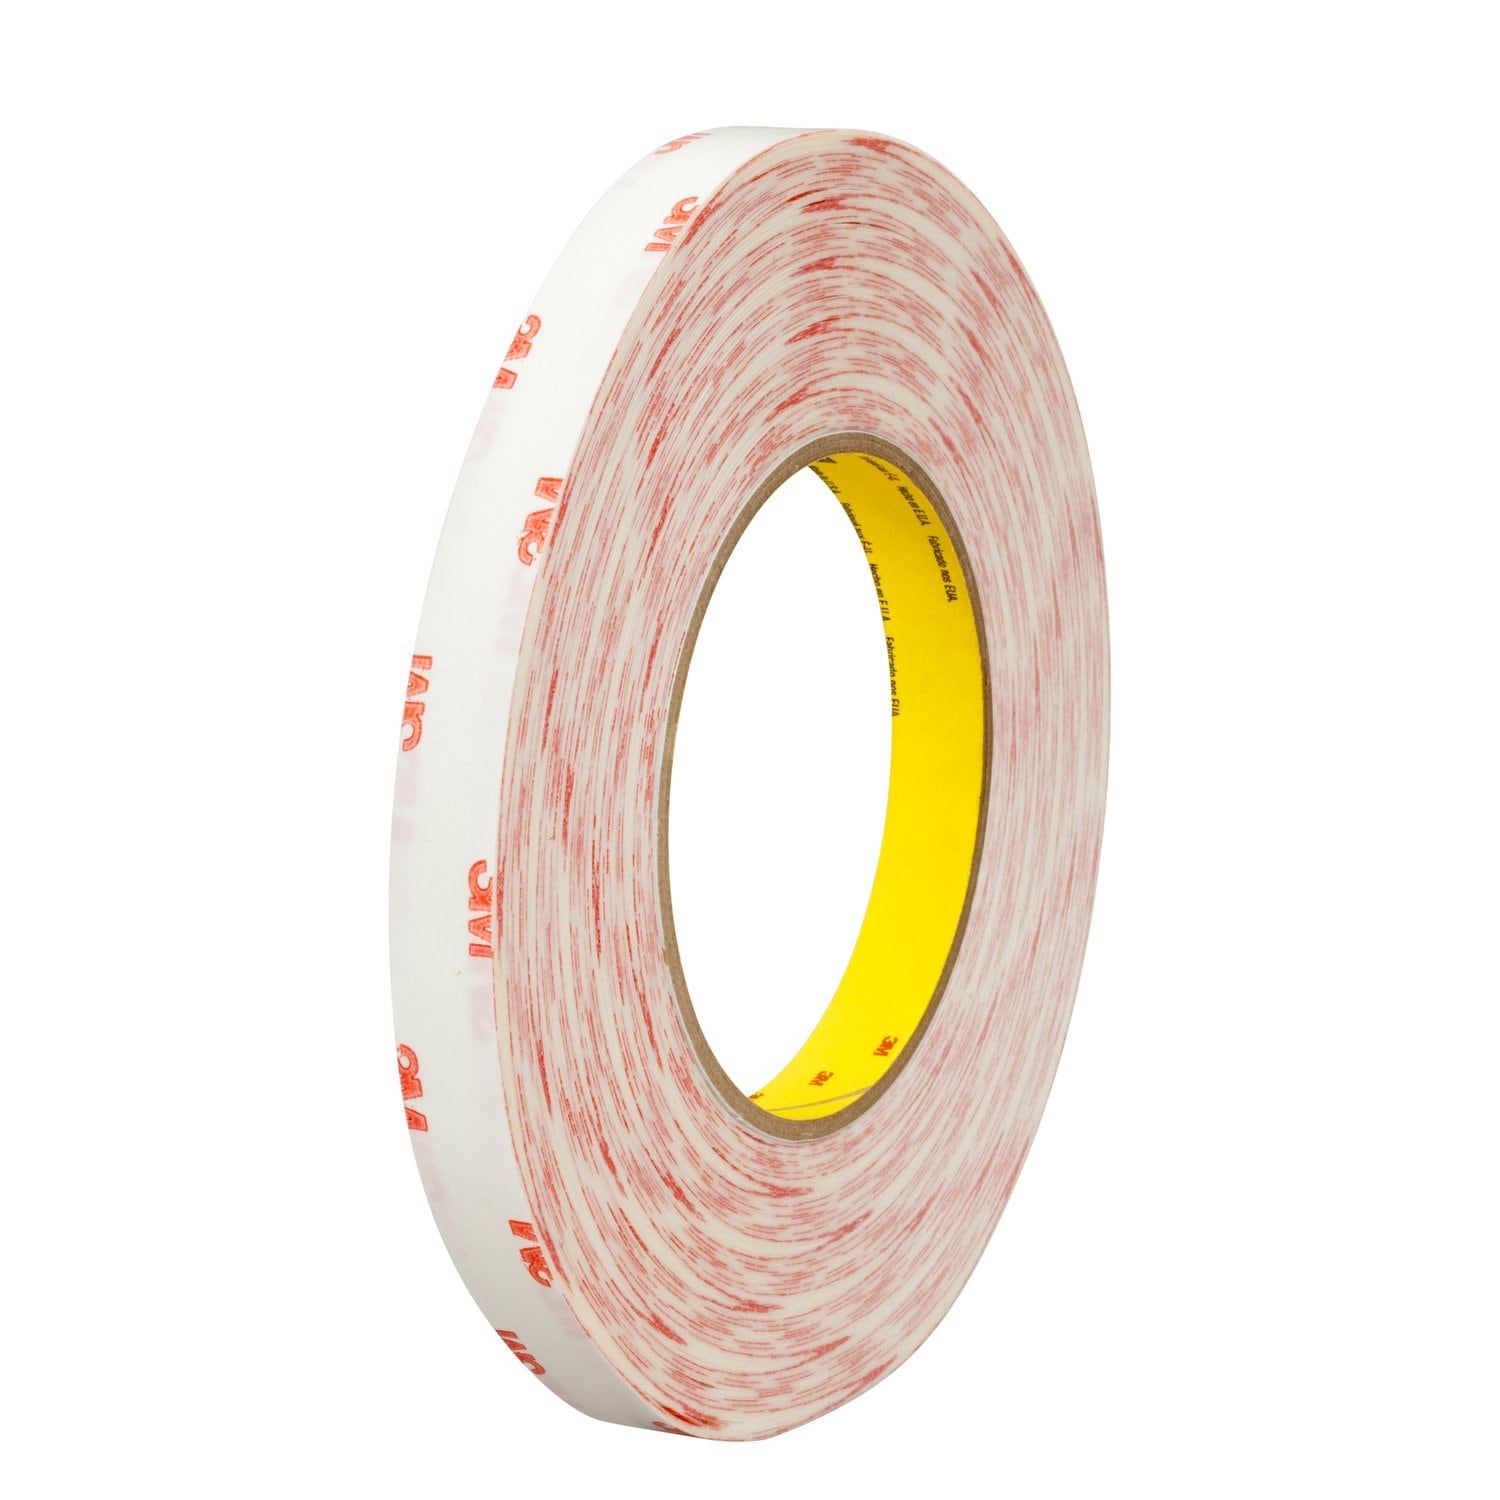 7010373847 - 3M Double Coated Tissue Tape 9456, Clear, 3/4 in x 72 yd, 4 mil, 48
rolls per case